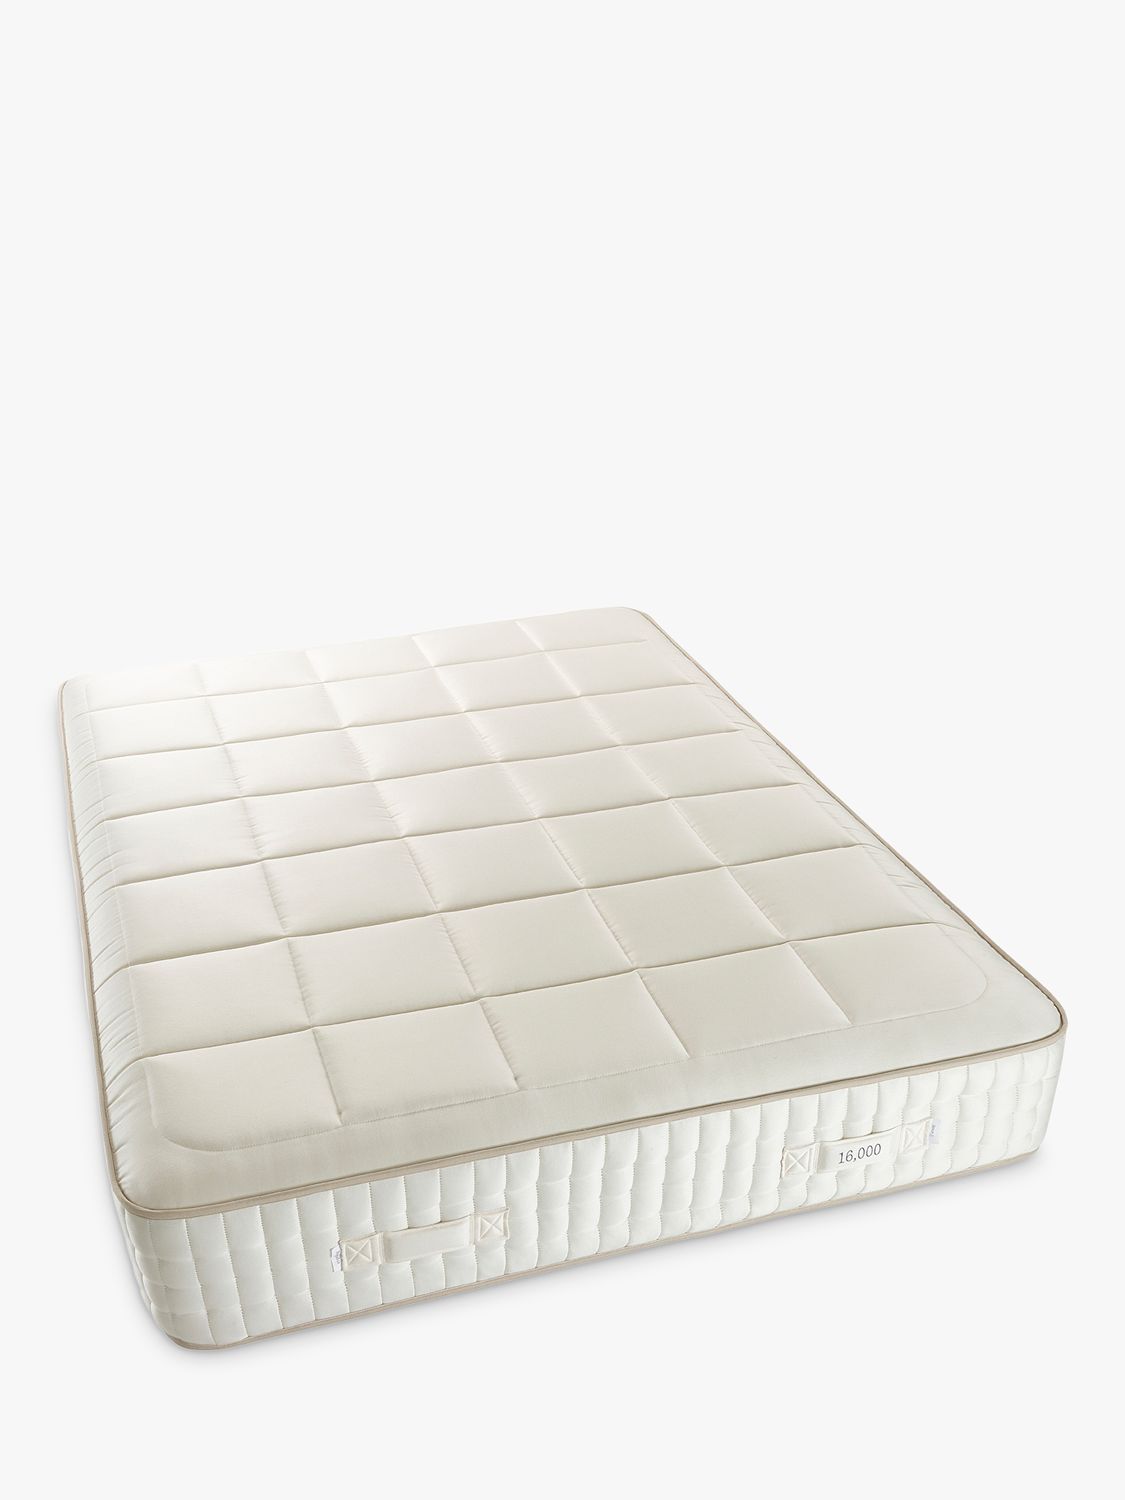 Photo of John lewis luxury natural collection mohair quilted 16000 double firmer tension pocket spring mattress